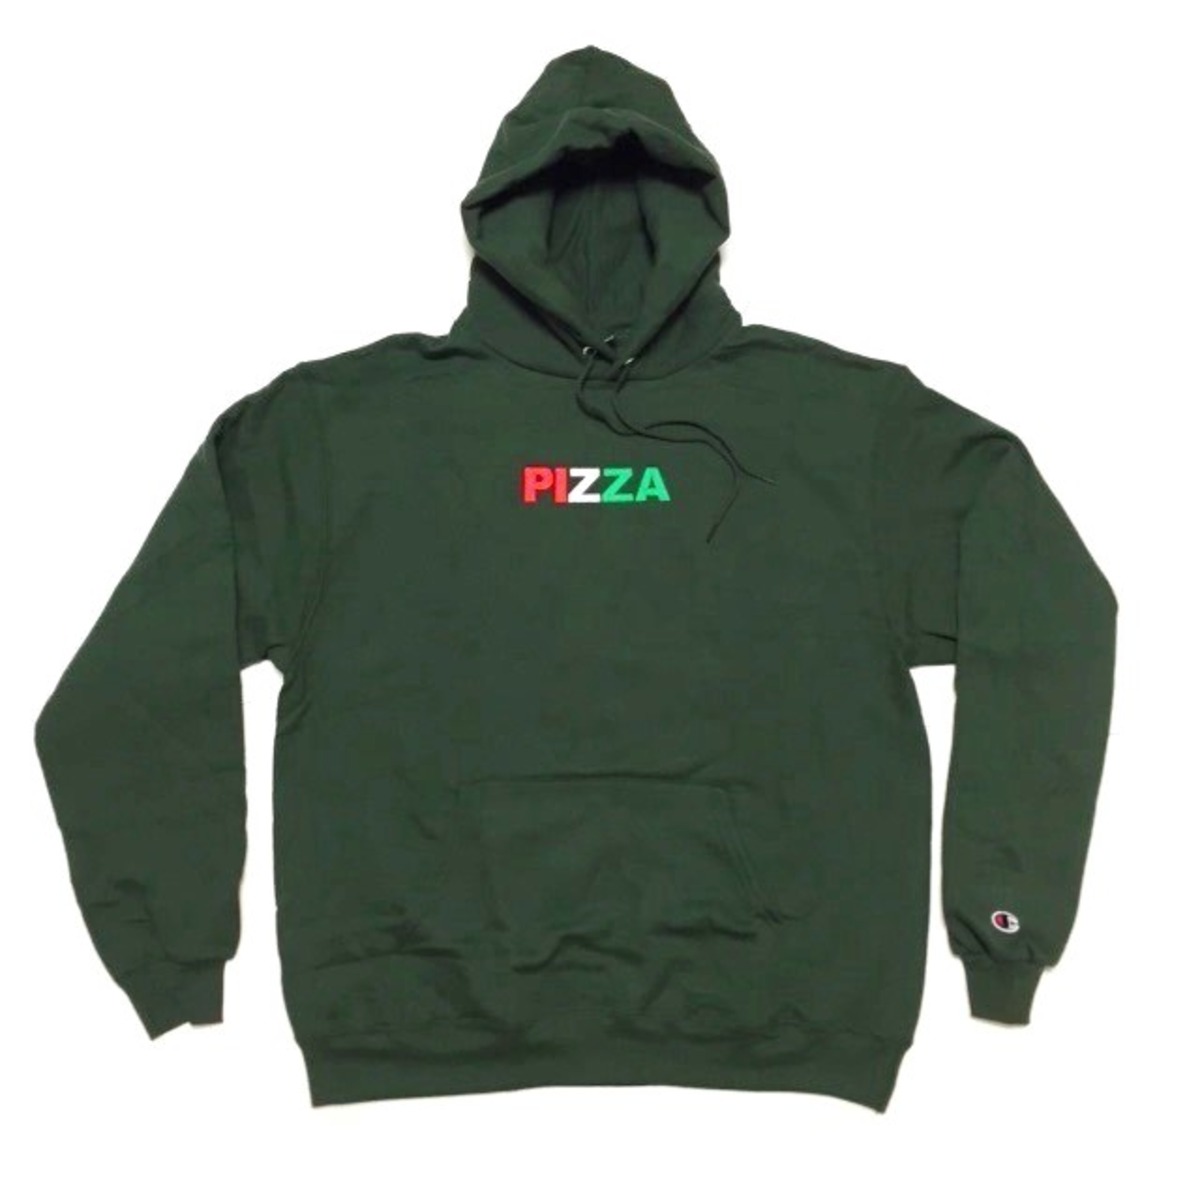 Pizza Skateboards x Tri Color Hoodie - Green x トリカラー フーディー グリーン) | -pretzels-skateboard and